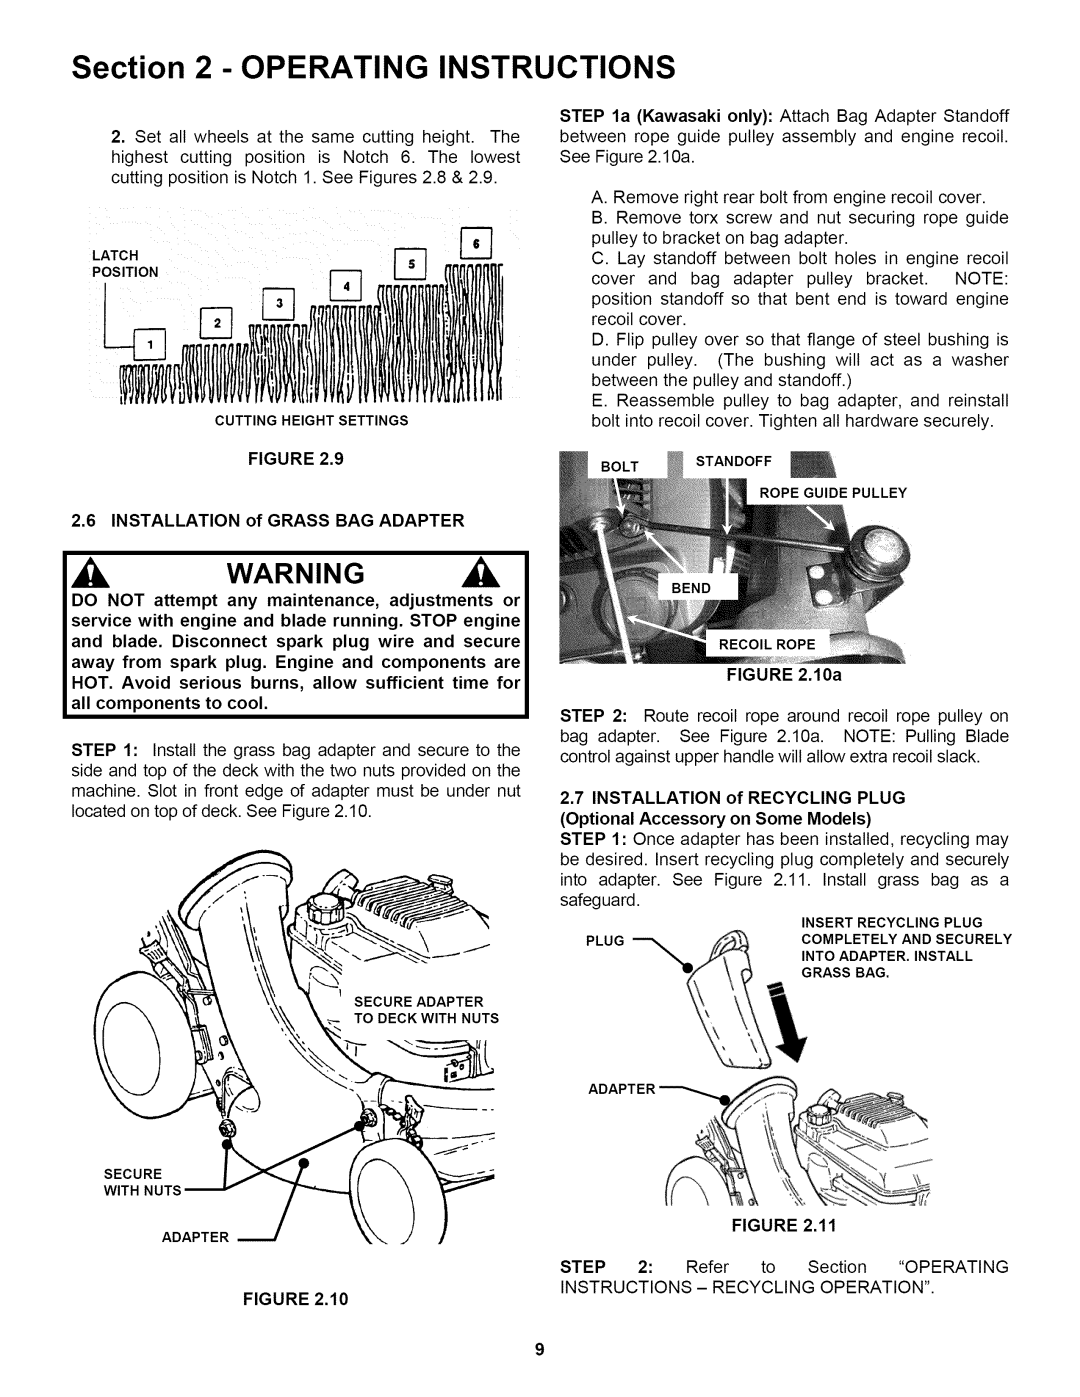 Snapper P216518B Operatinginstructions, 6INSTALLATION of GRASS BAG ADAPTER, Figure, 10a, INSTALLATION of RECYCLING PLUG 